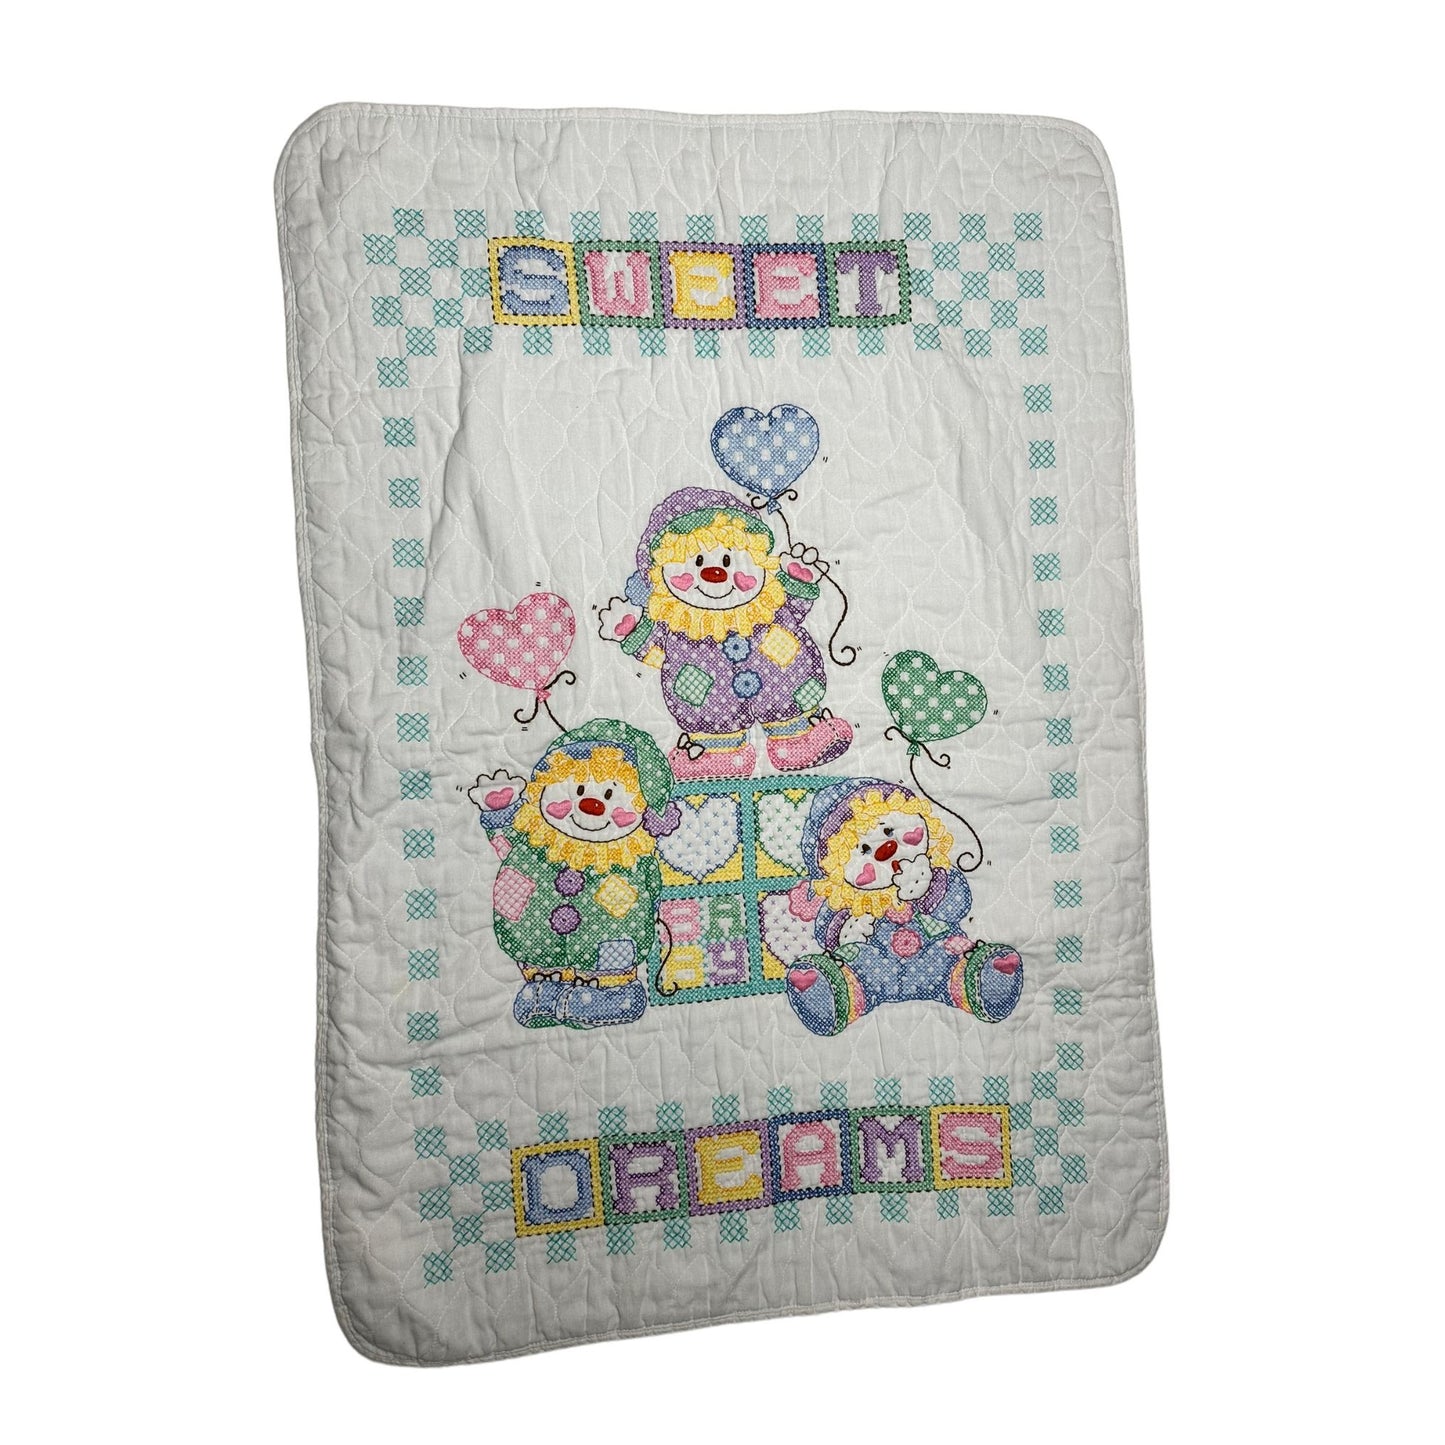 Handmade Baby Blanket Embroidered Clowns Sweet Dreams Cross Stitch 27"x3' 2"